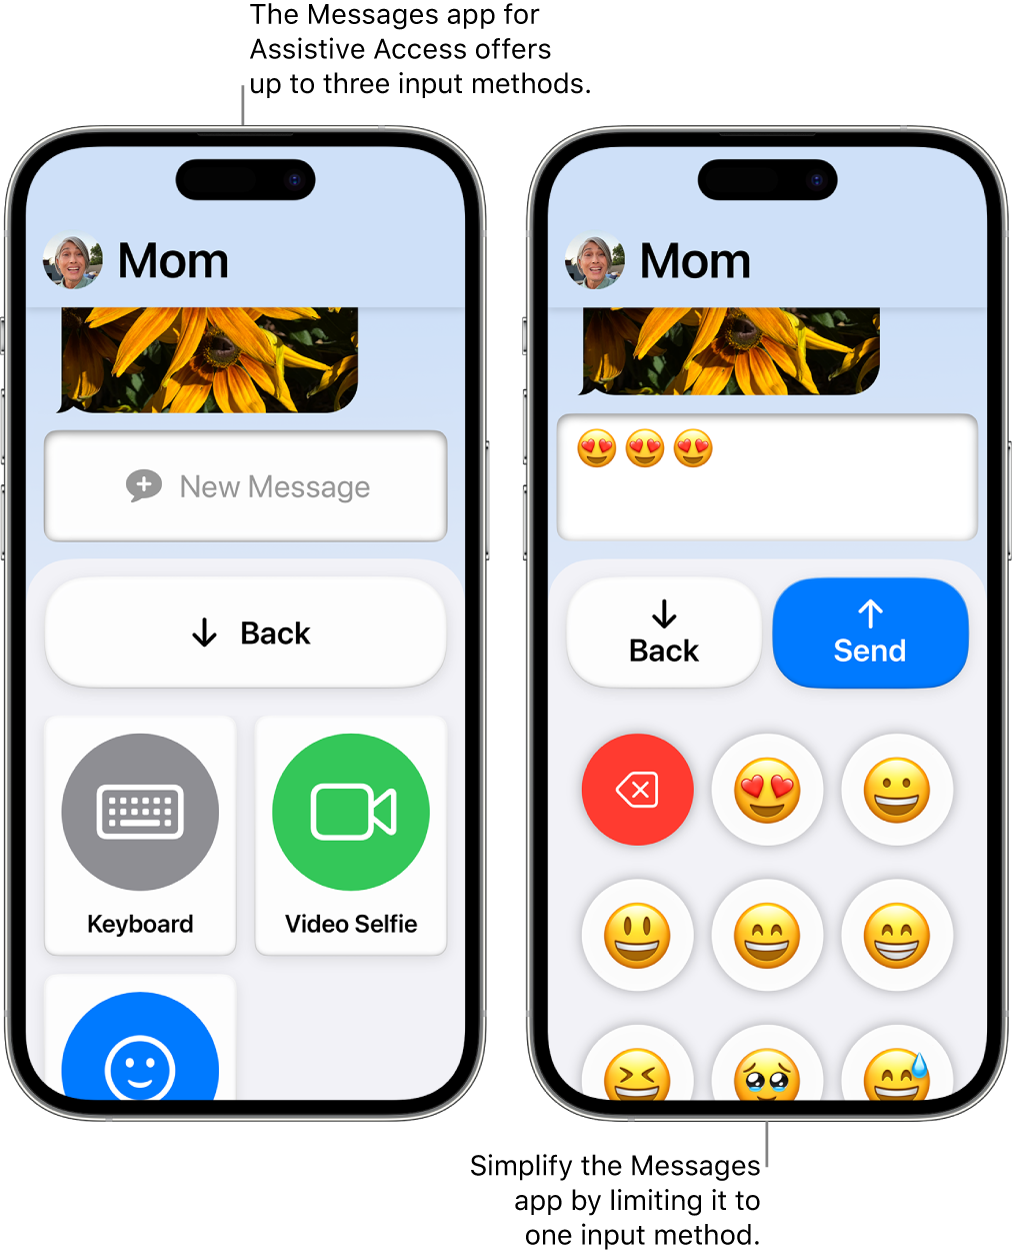 Two iPhones in Assistive Access. One iPhone shows the Messages app with input methods for the user to choose from, like Keyboard or Video Selfie. The other shows a message being sent using an emoji-only keyboard.